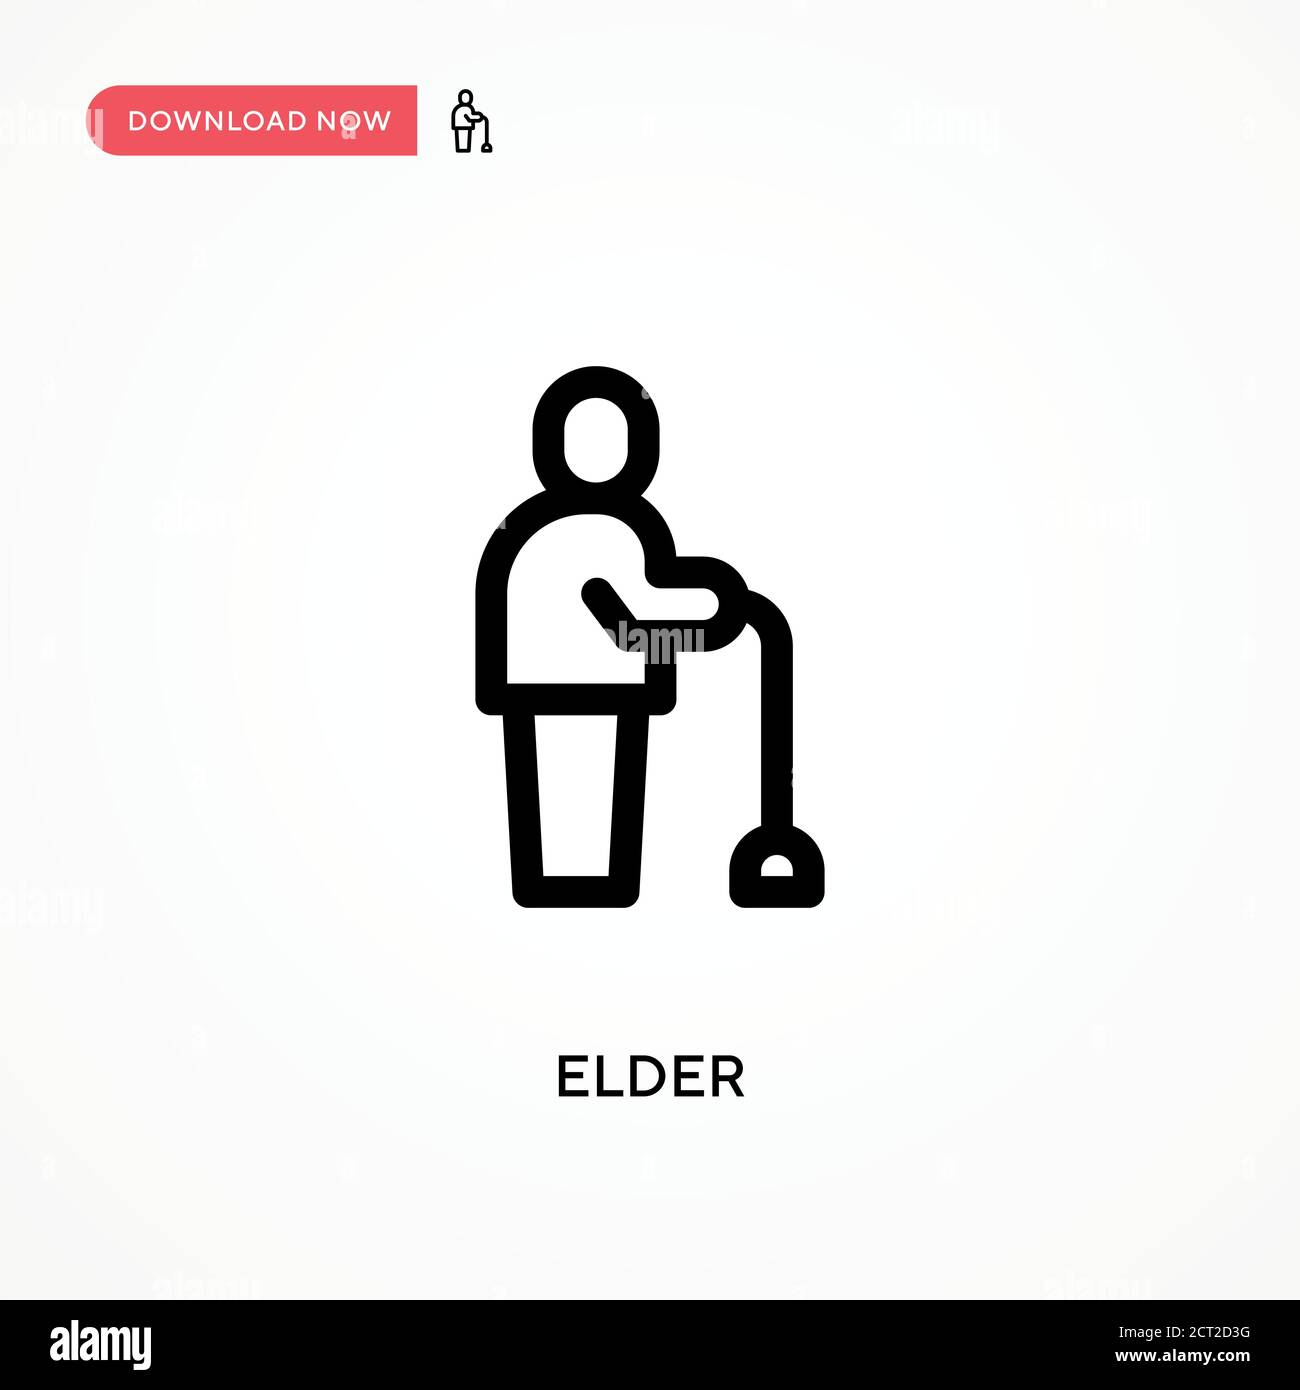 Elder Simple vector icon. Modern, simple flat vector illustration for web site or mobile app Stock Vector